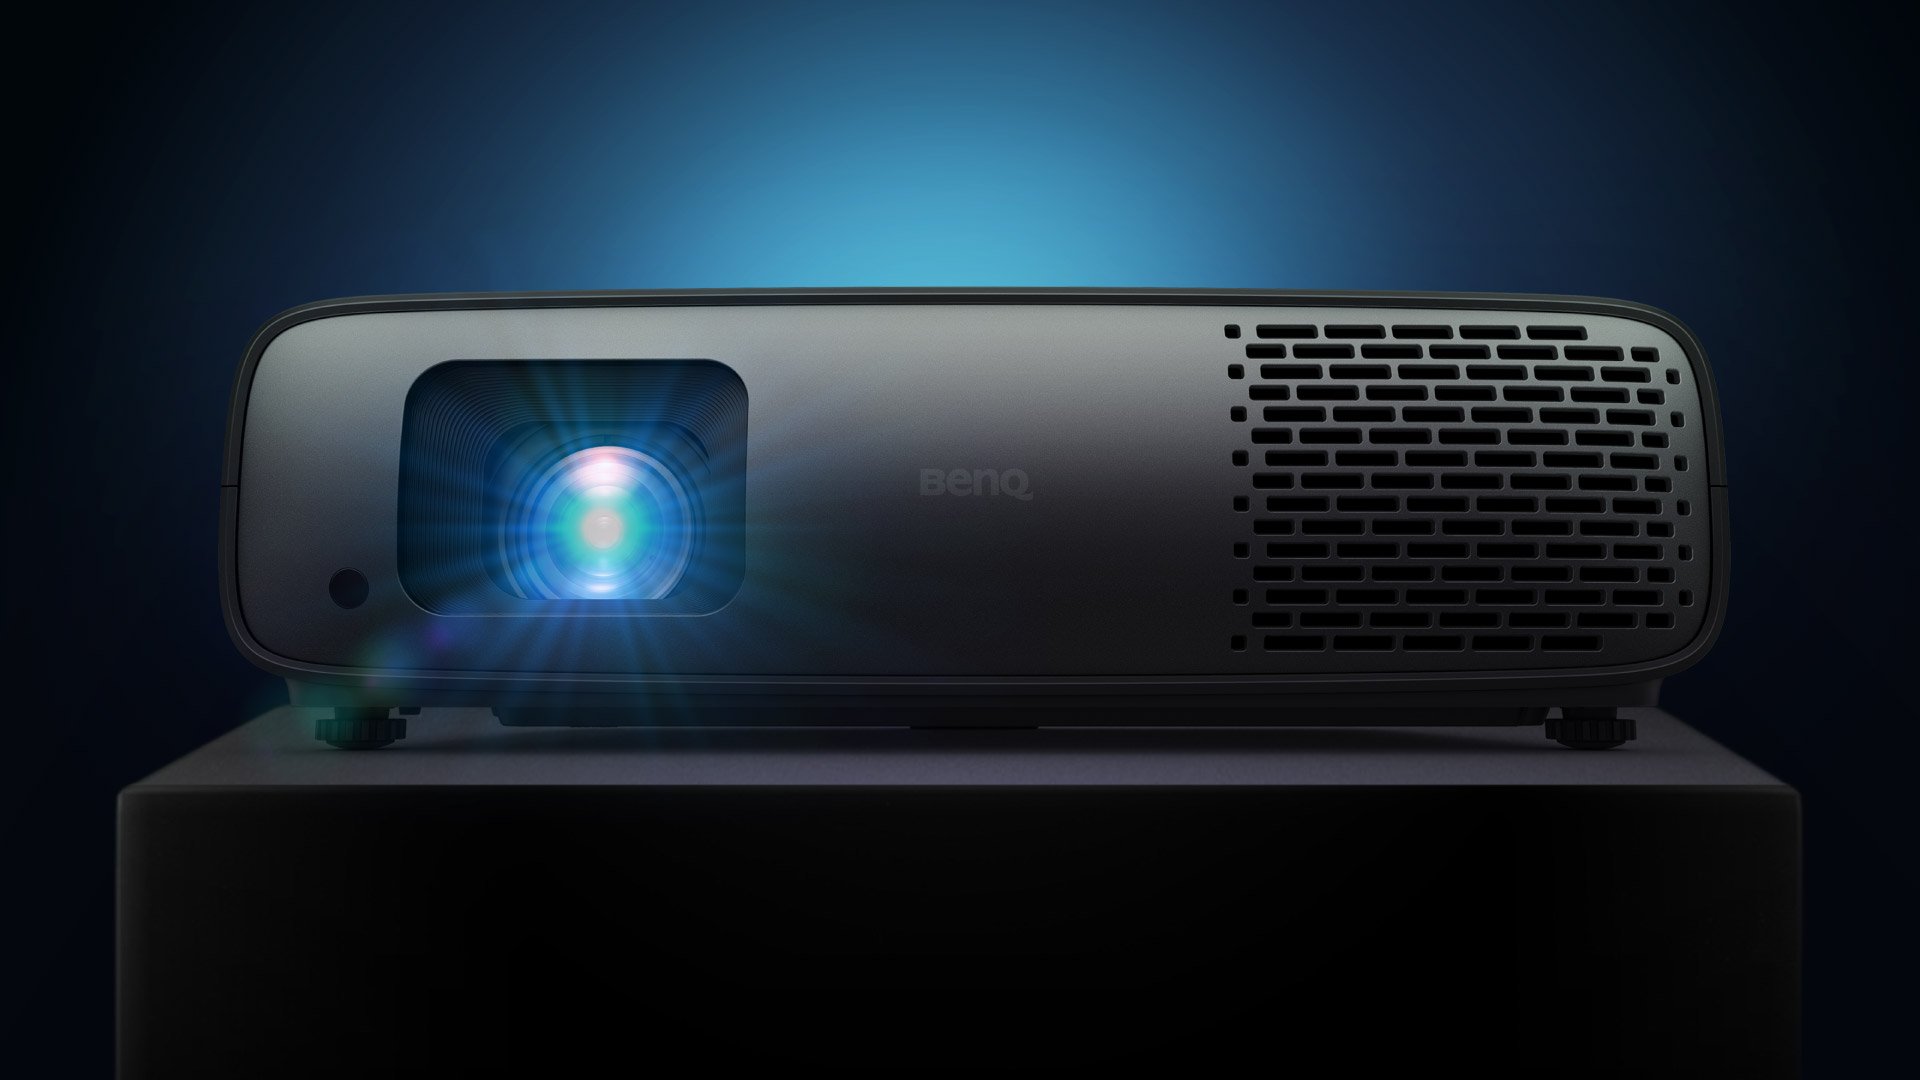 The W4000i 4K projector presents Leading Local Contrast Enhancement